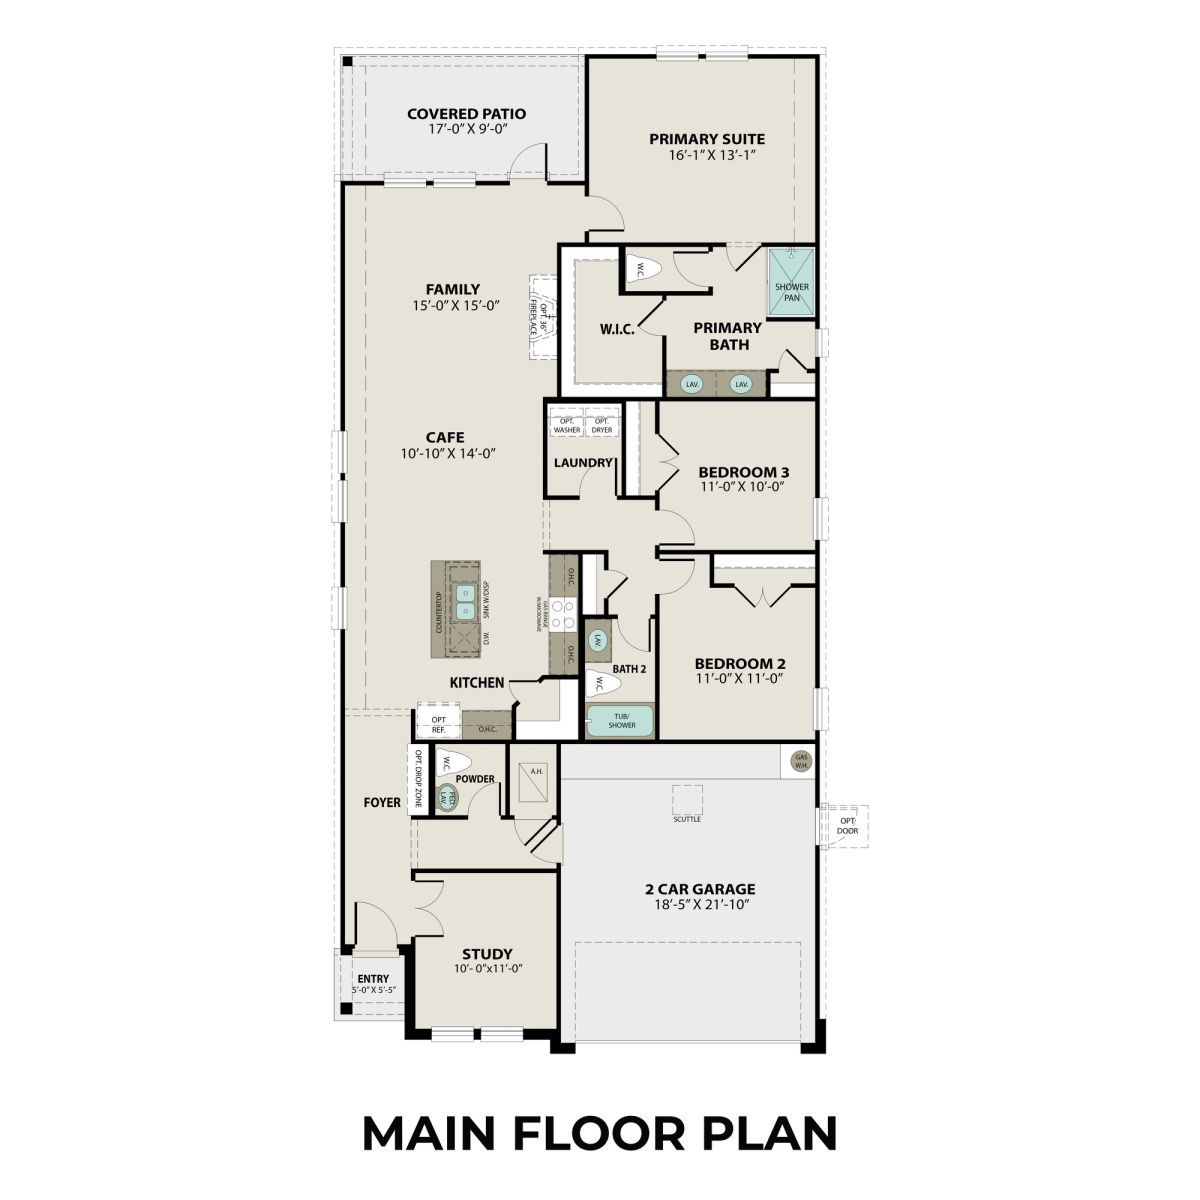 1 - The Riviera A buildable floor plan layout in Davidson Homes' Emberly community.